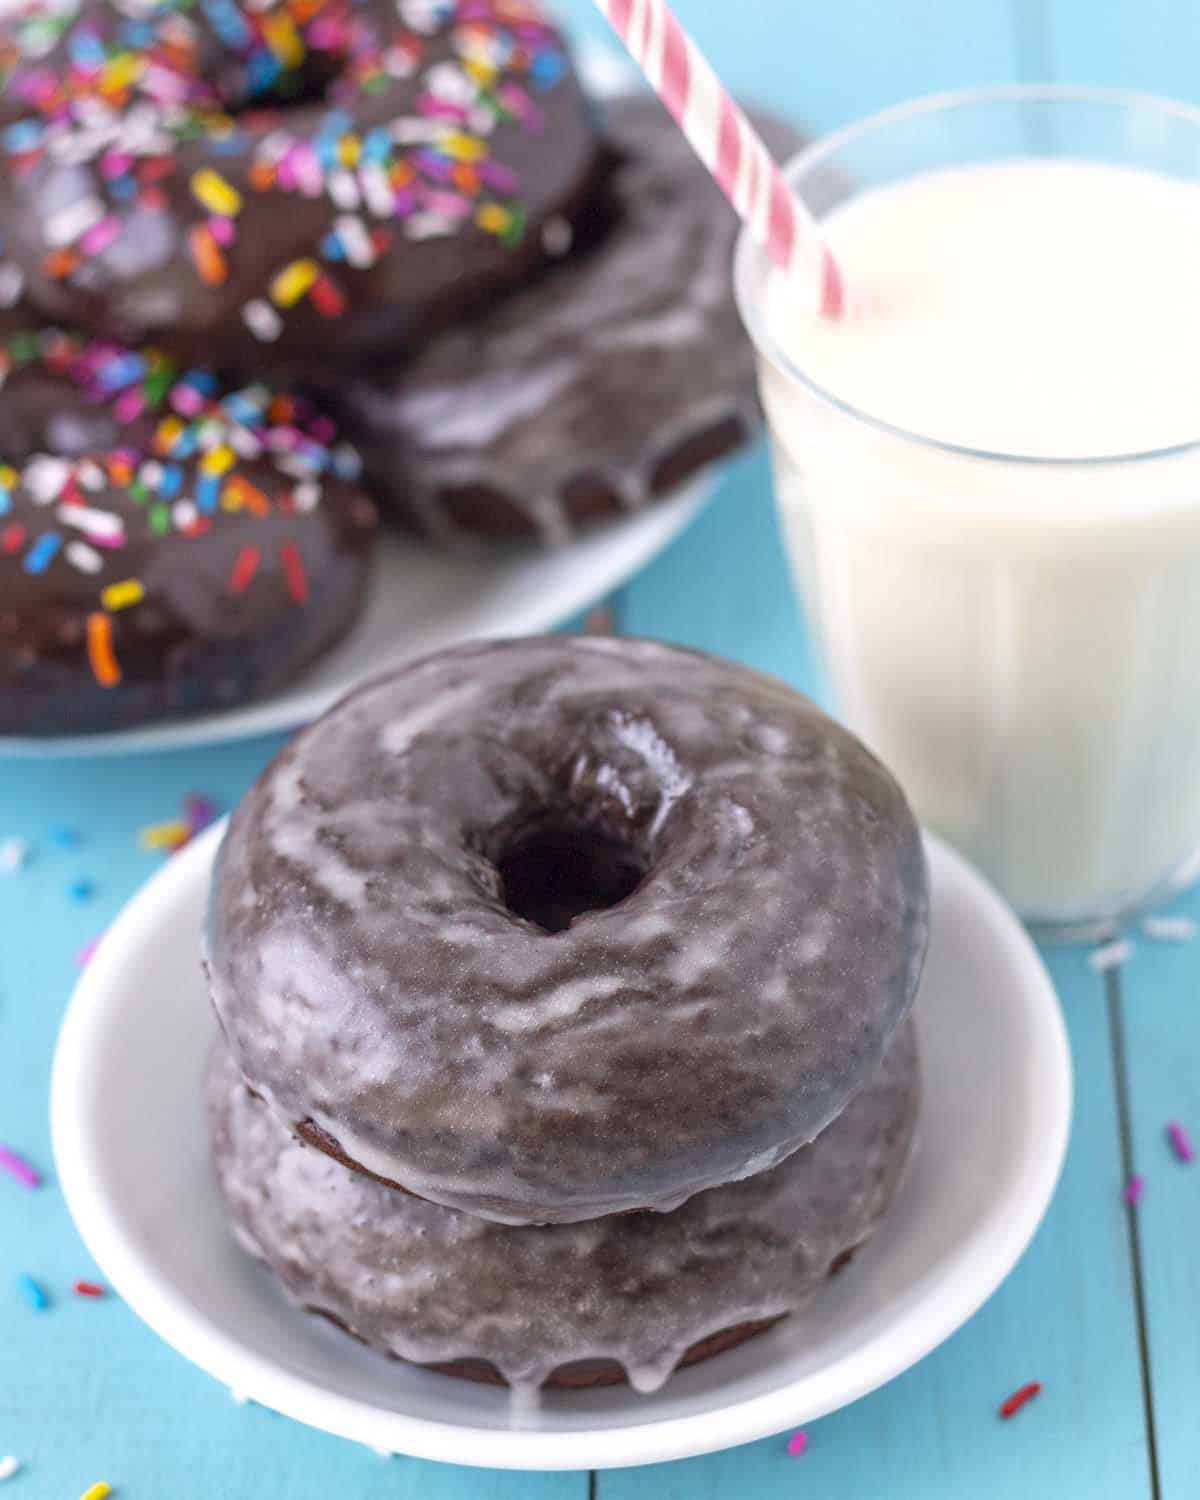 Two vanilla sugar glaze dipped vegan chocolate donuts with sprinkles sitting on a small white plate.